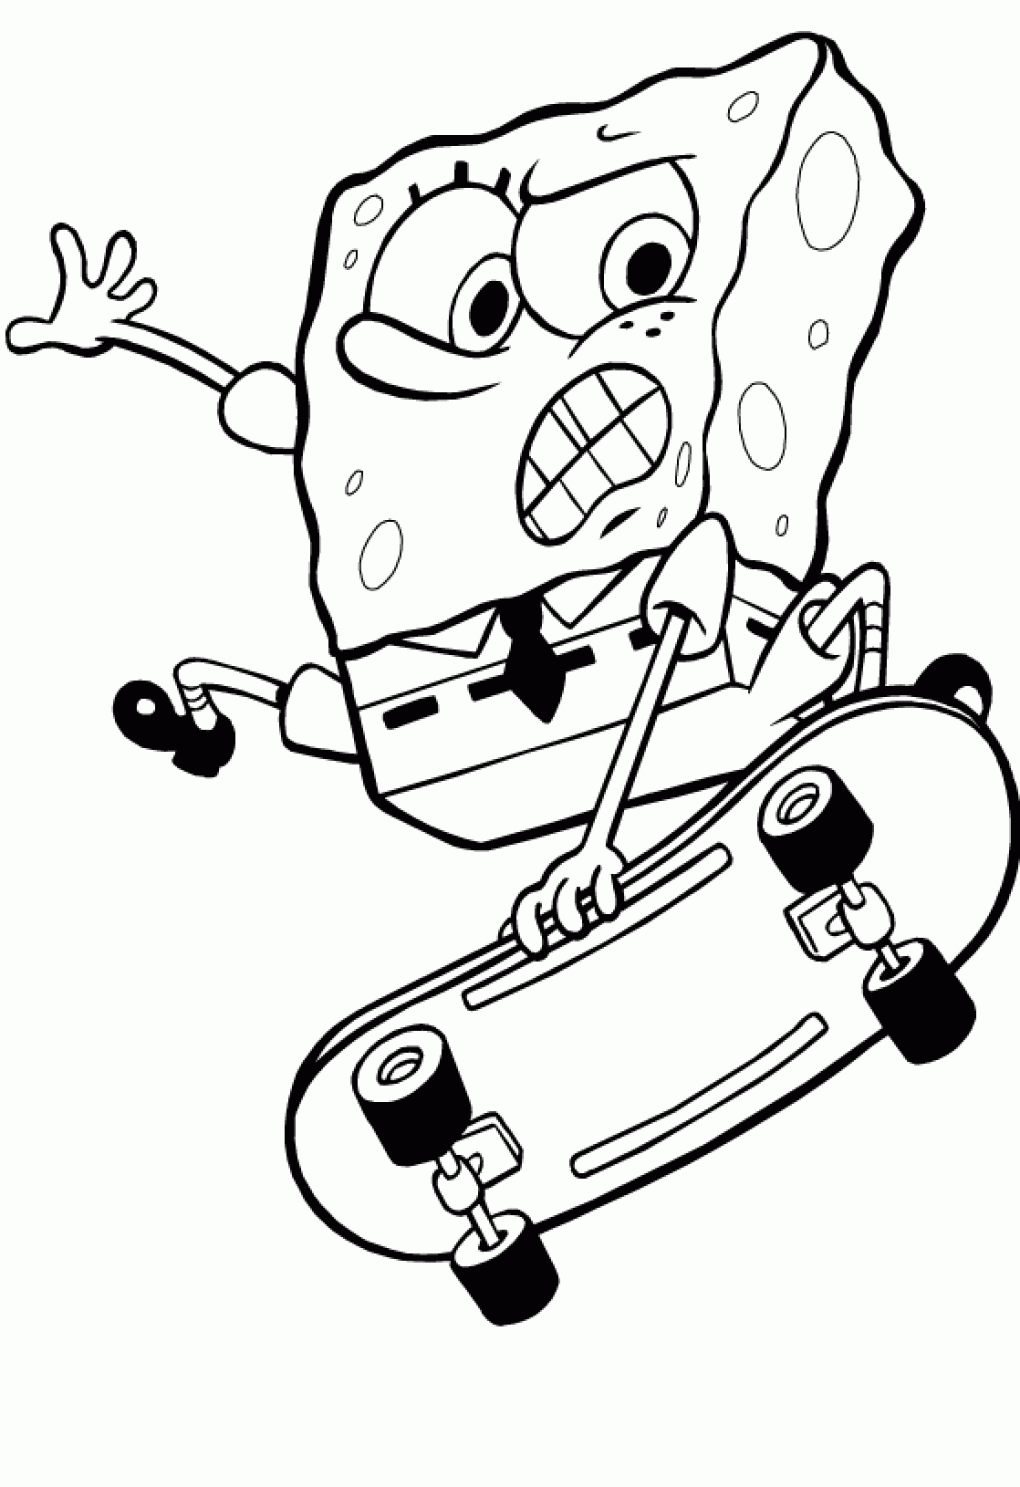 Funny Spongebob Coloring Pages Printables 43